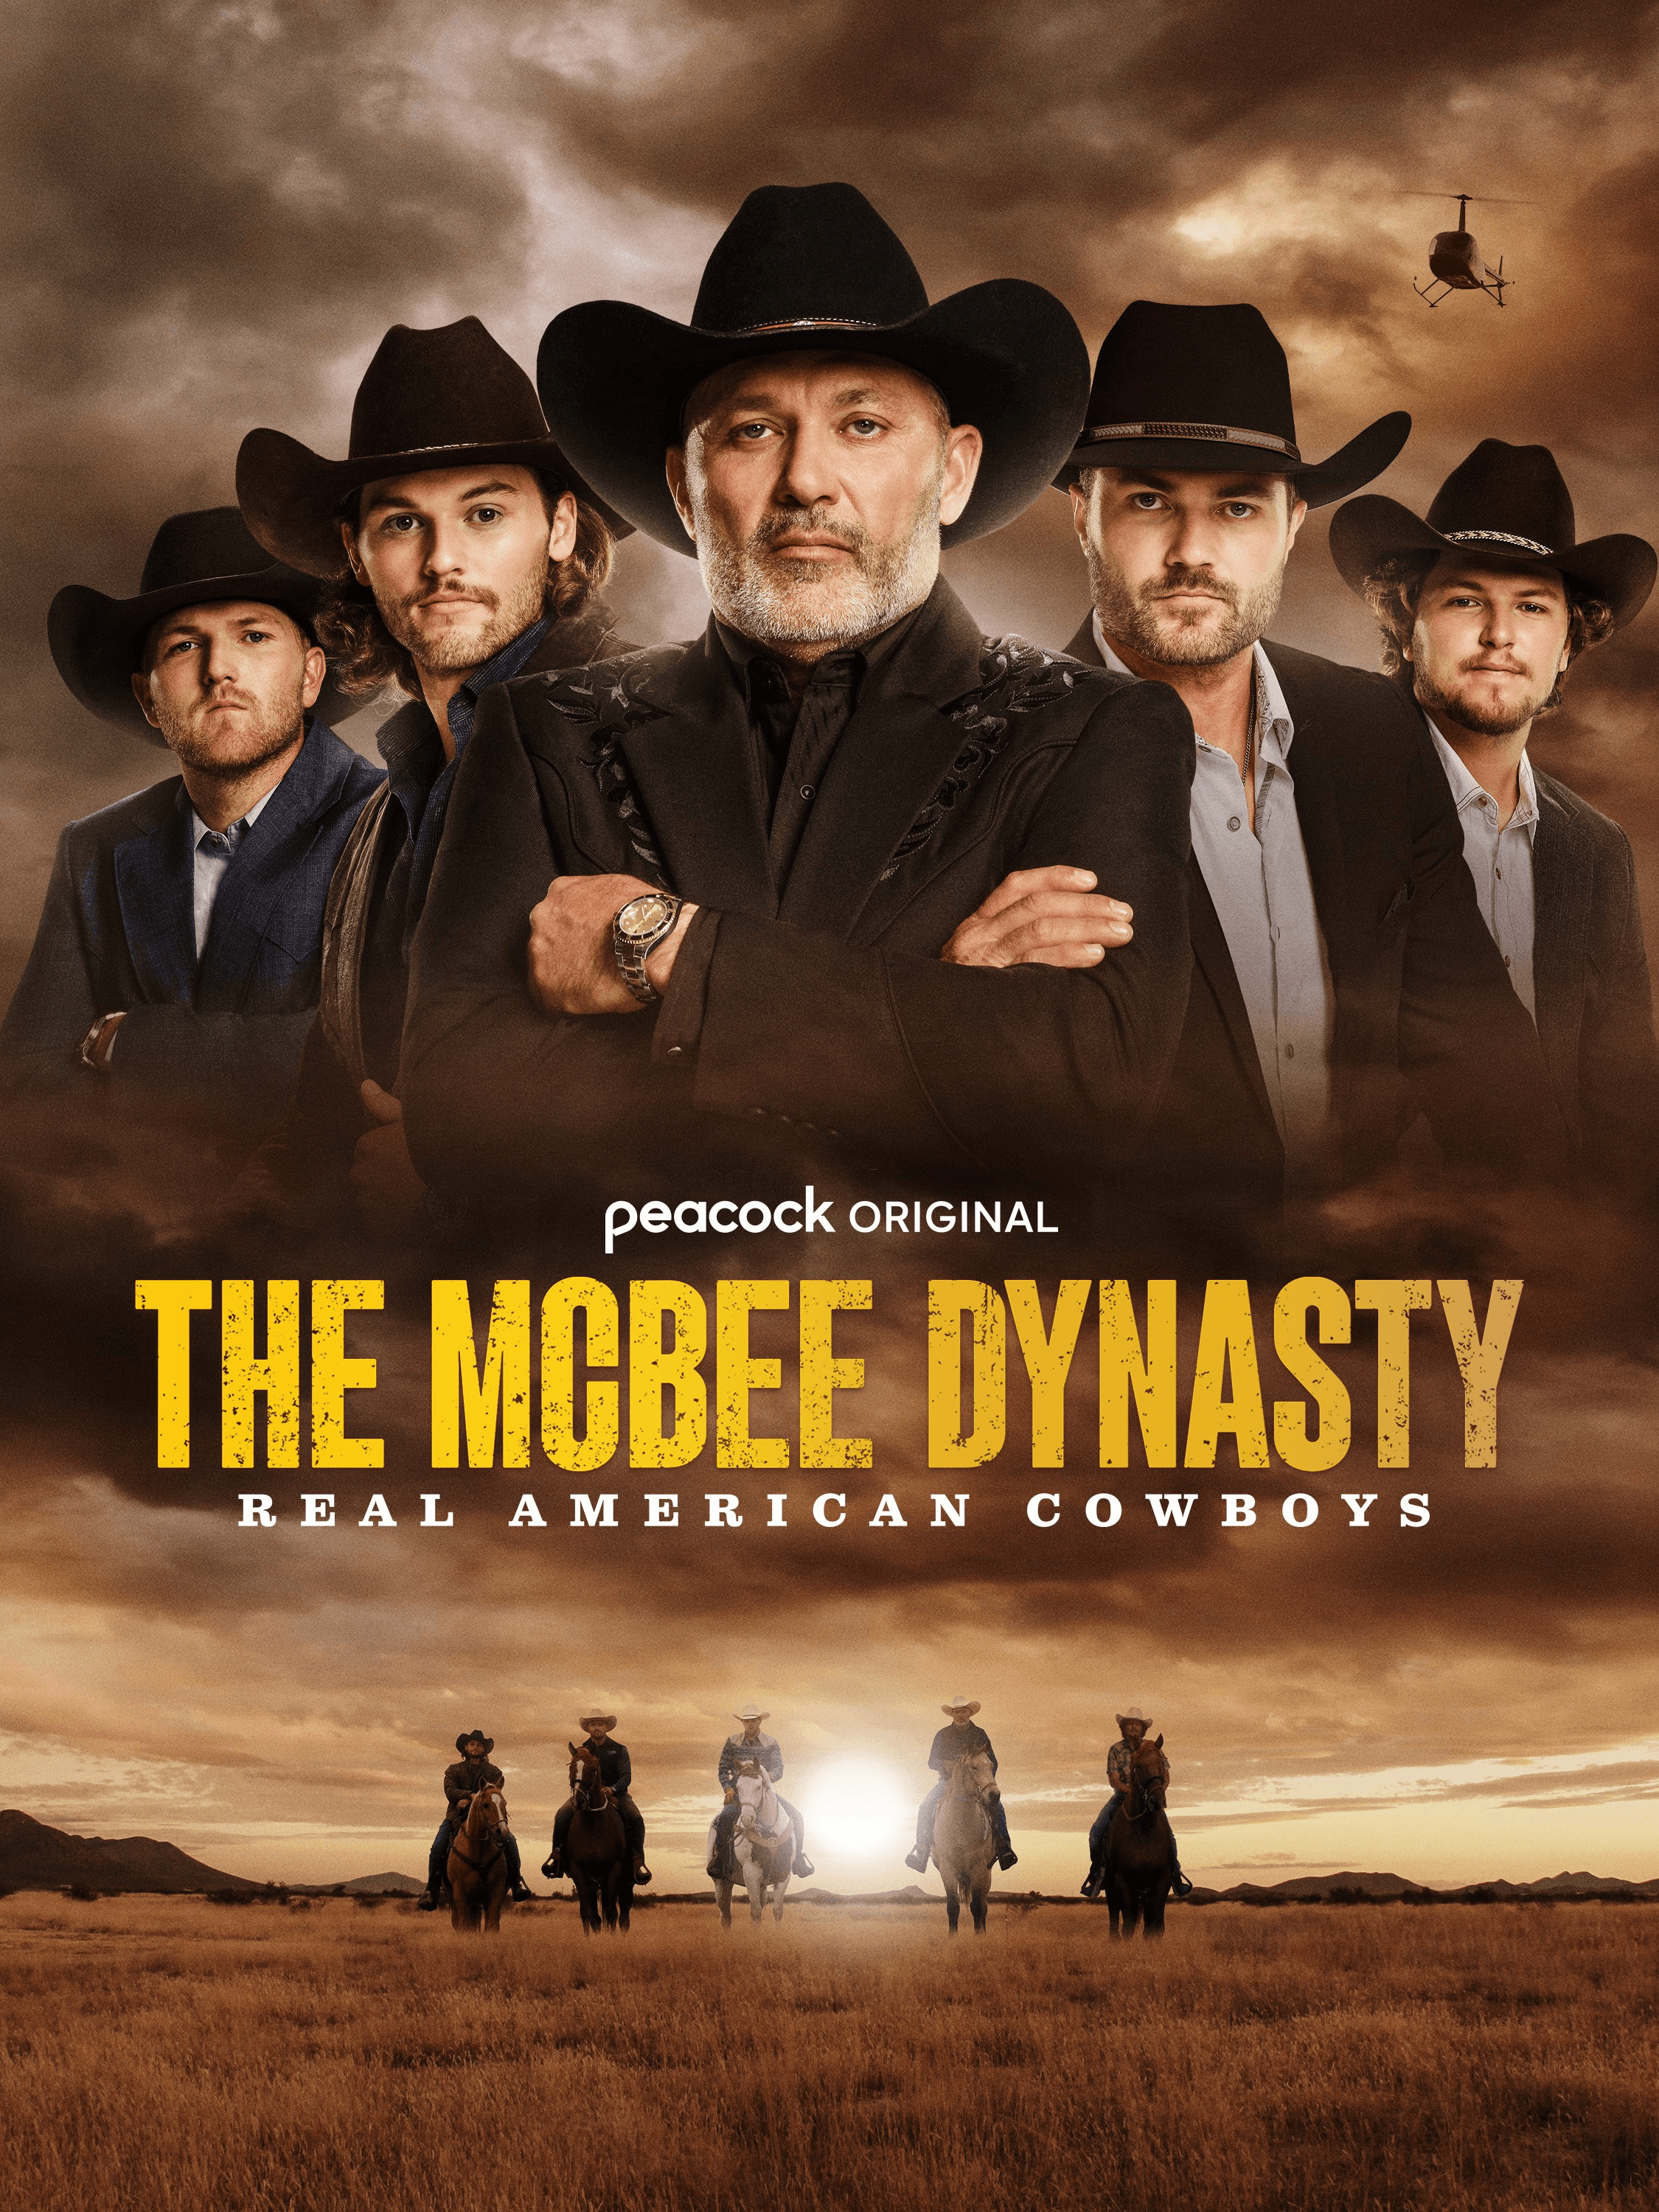 The McBee Dynasty: Real American Cowboys Image